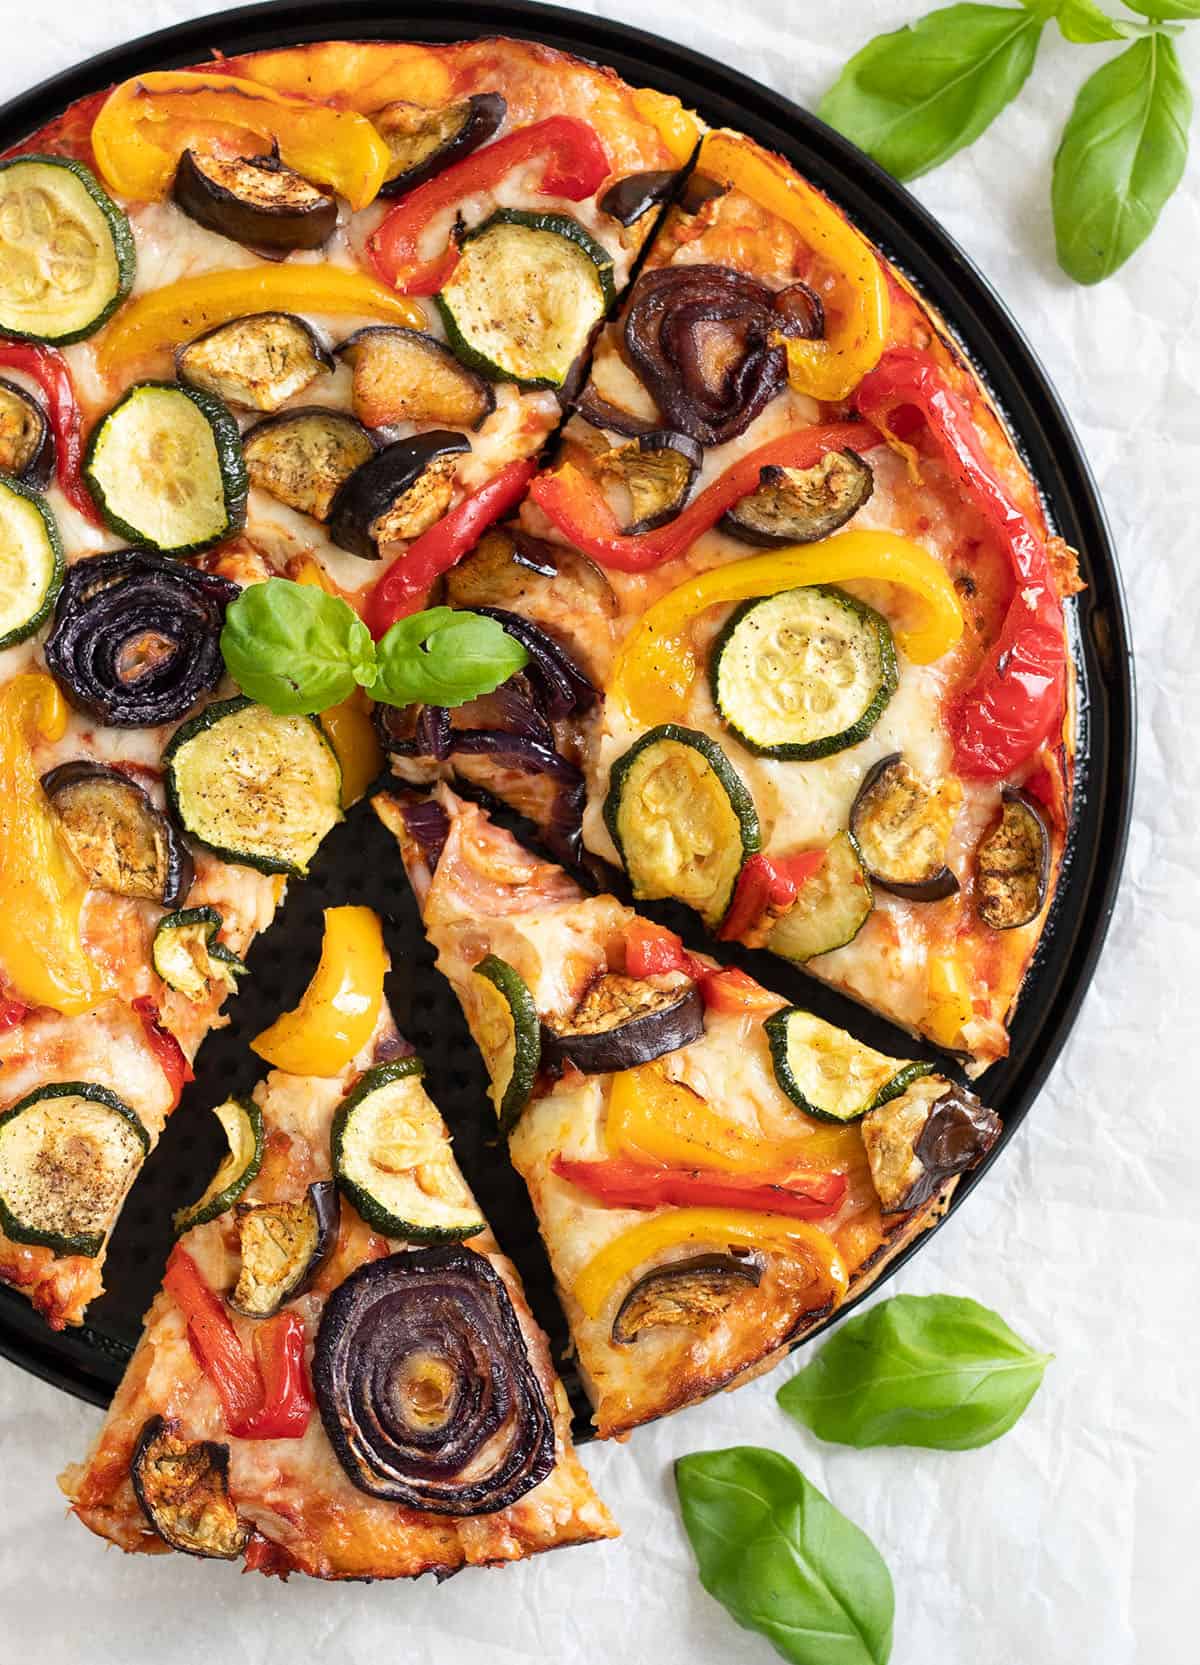 Roasted Vegetable Pizza topped with roasted veggies, cheese and pizza sauce.